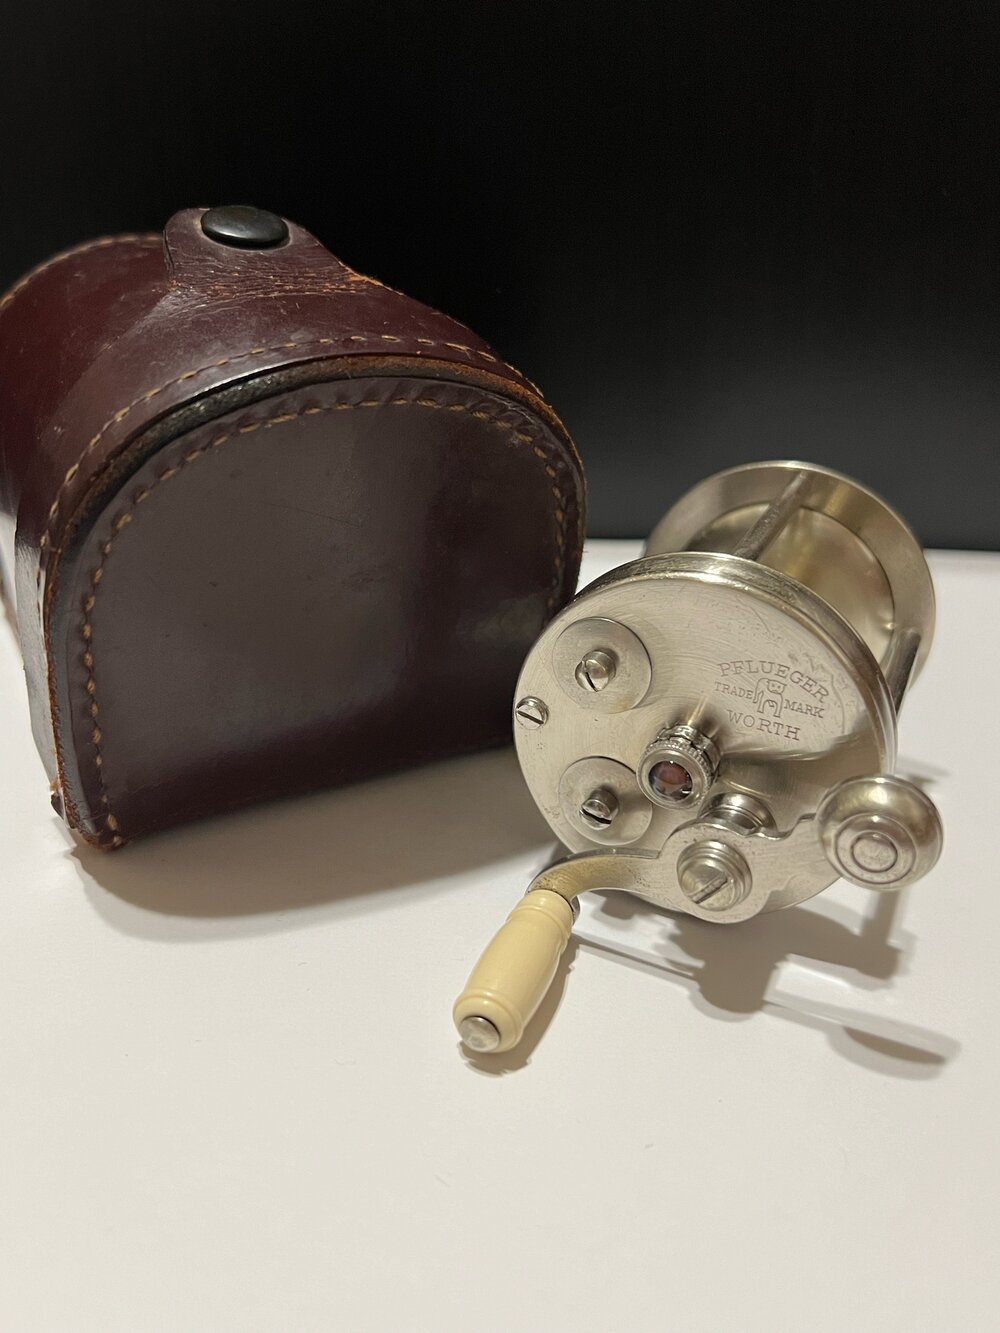 Pflueger WORTH Jeweled with Leather Case Circa - 1915 — VINTAGE FISHING  REELS